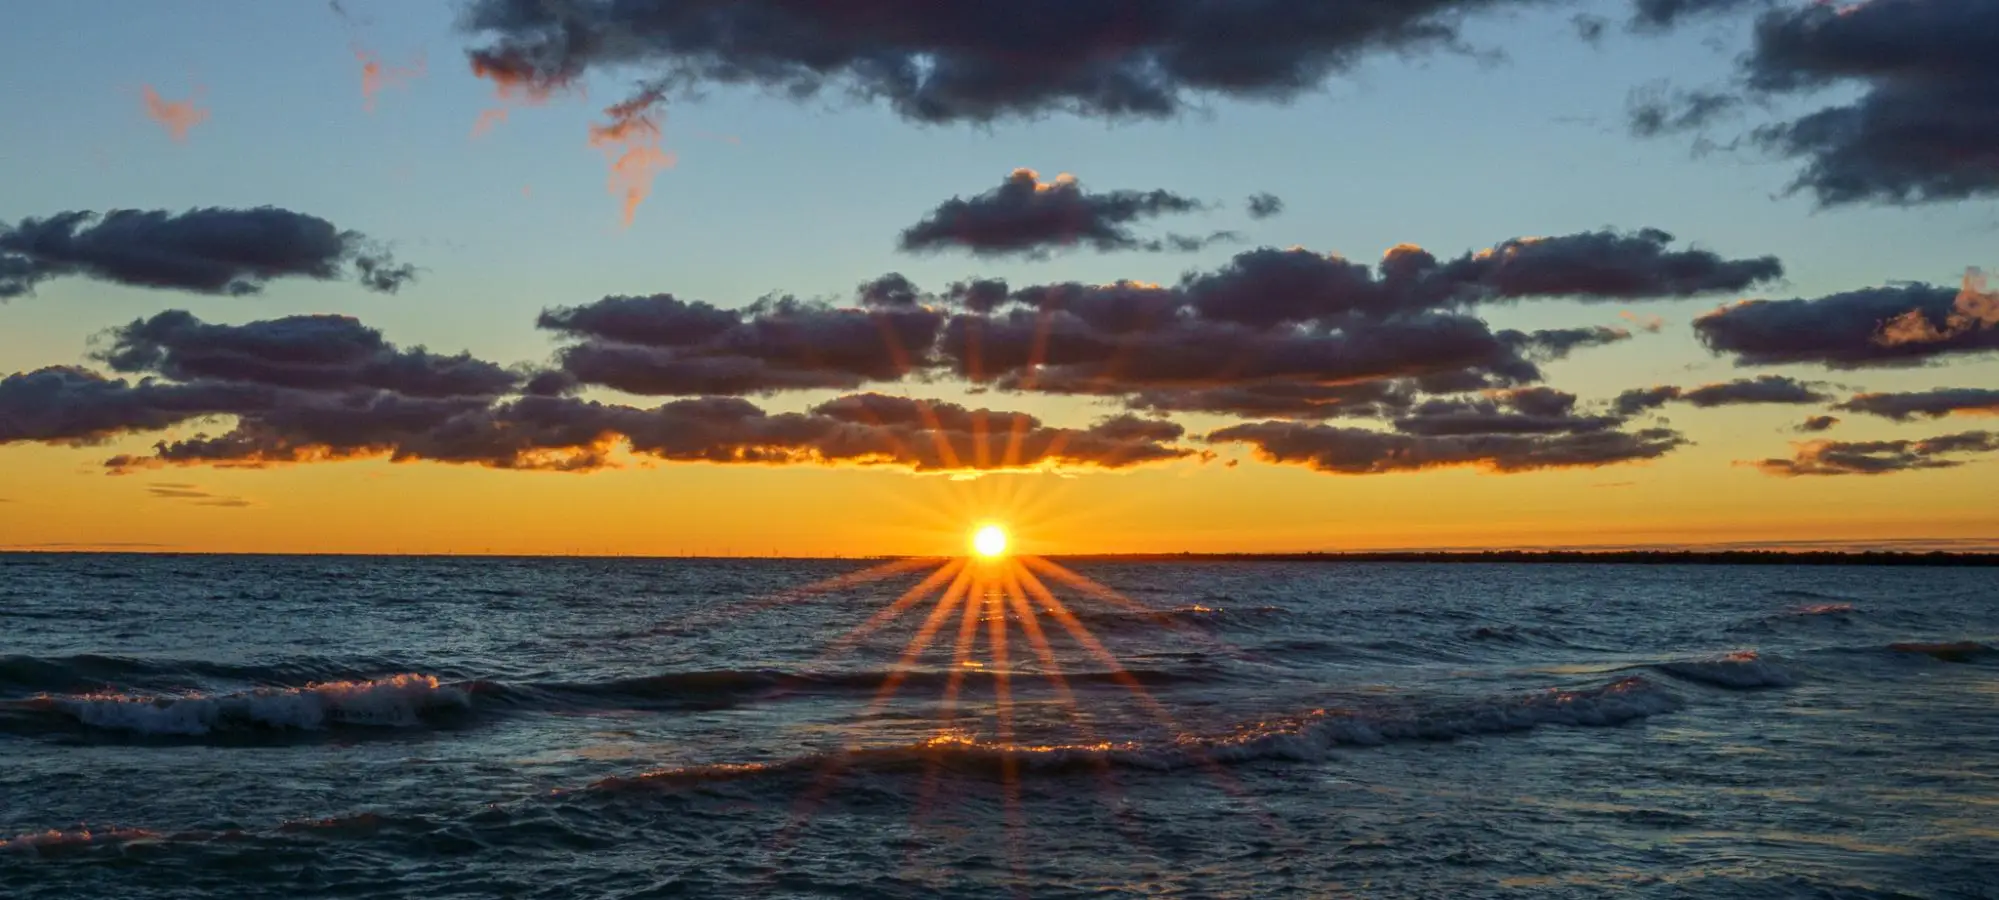 Image of a sunset over the ocean.